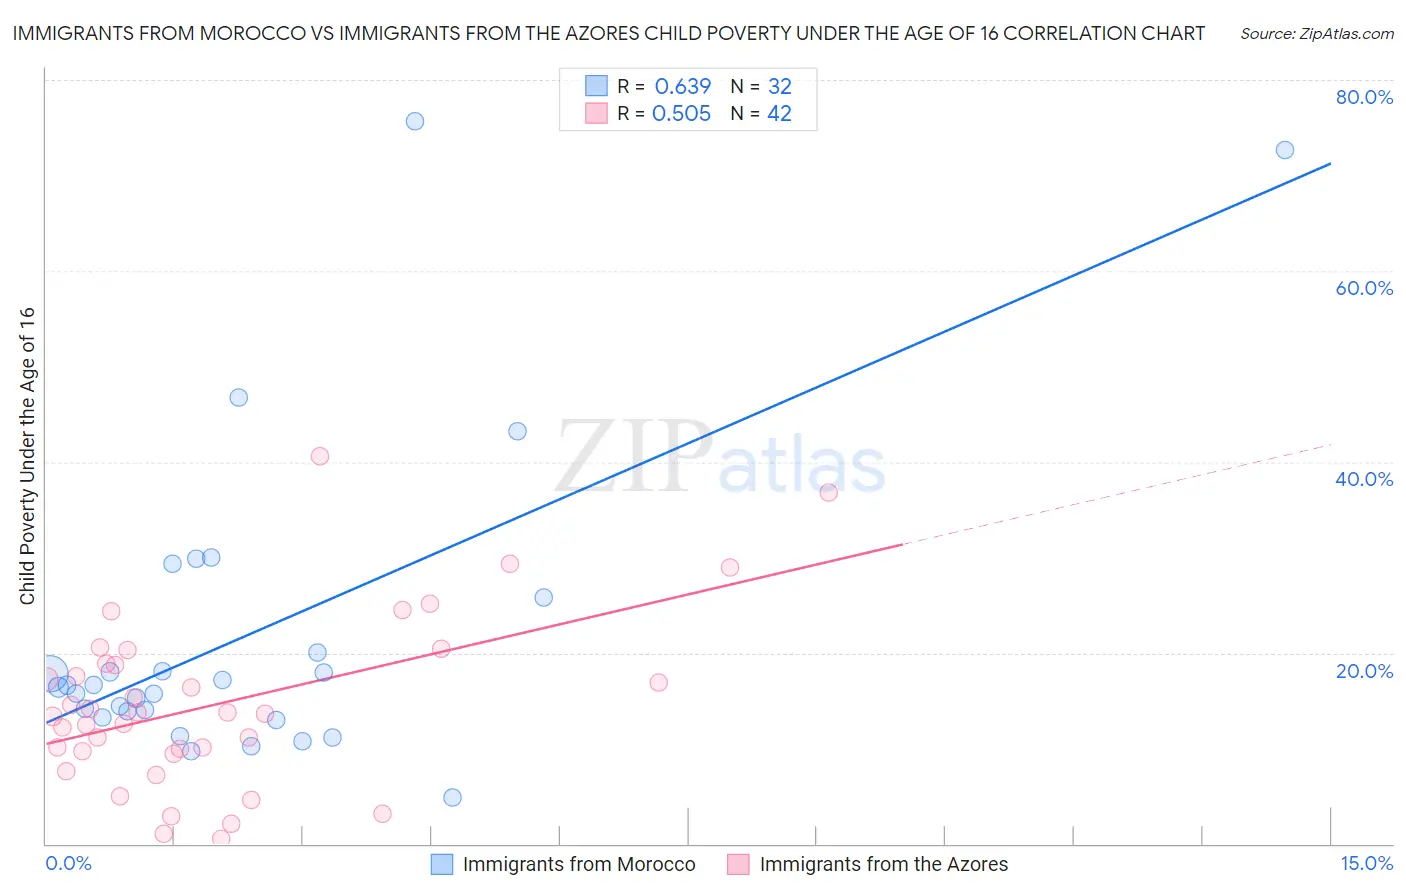 Immigrants from Morocco vs Immigrants from the Azores Child Poverty Under the Age of 16